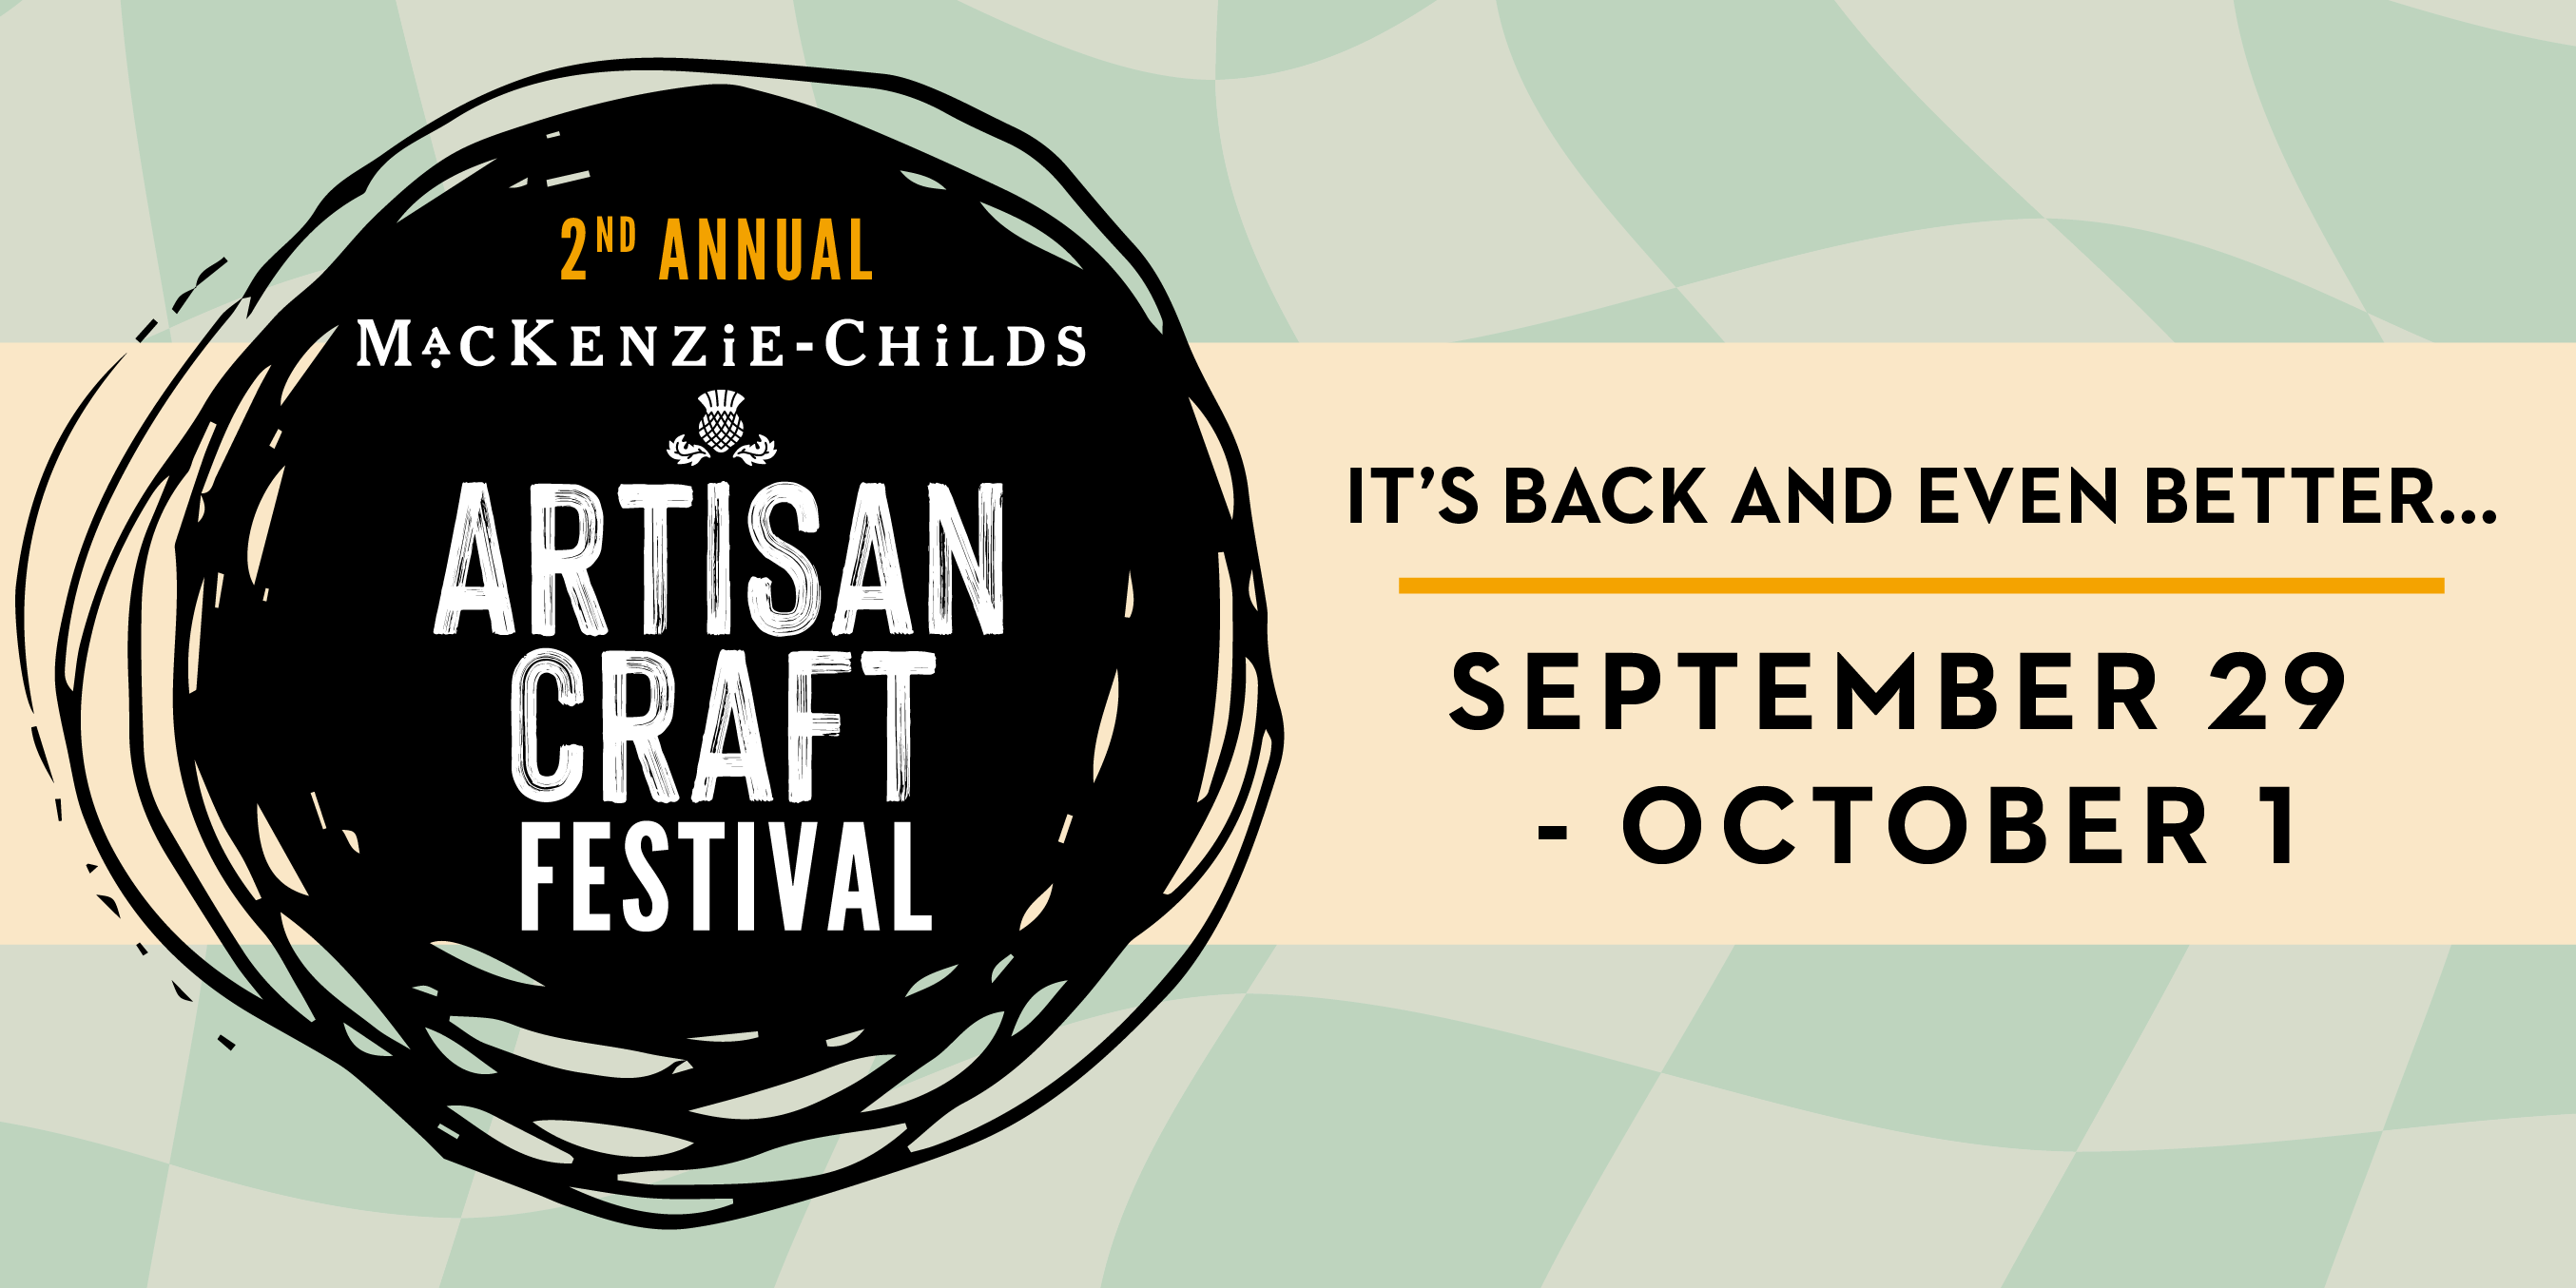 It's back and even better! The 2nd Annual Artisan Craft Festival is September 29 - October 1.